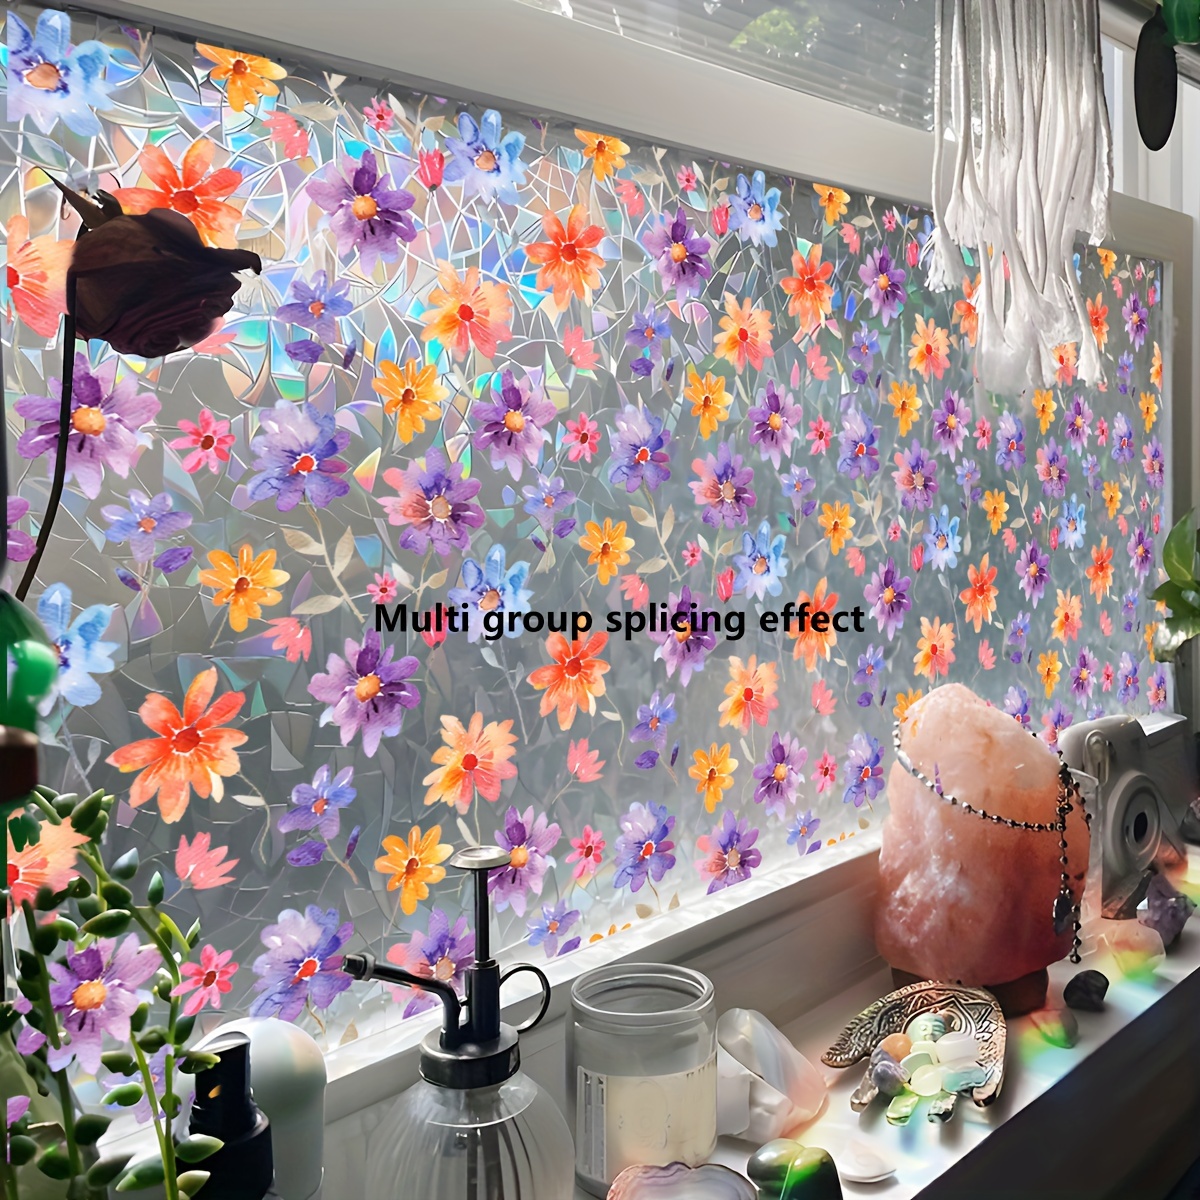 

Colorful Hand-painted Flower Privacy Window Cling, 16"x16" - Static Electricity Adhesive, Removable & Waterproof Pvc Film For Glass Doors And Windows